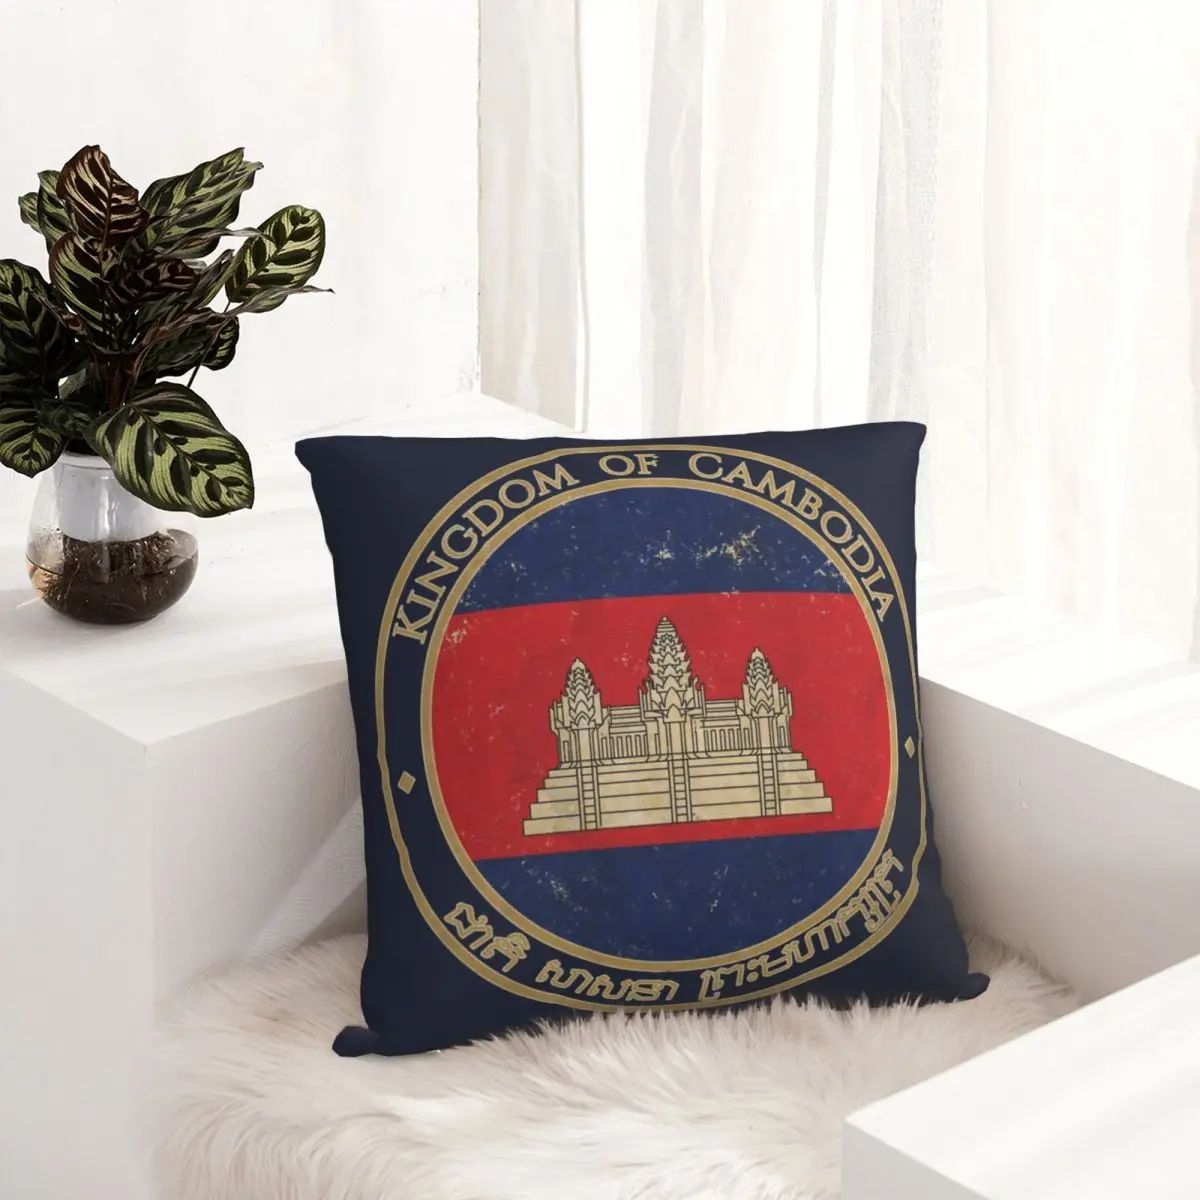 Cambodia Asia Asian Flag Square Pillowcase Cushion Cover Creative Zipper Home Decorative Pillow Case for Room Nordic 45*45cm images - 6